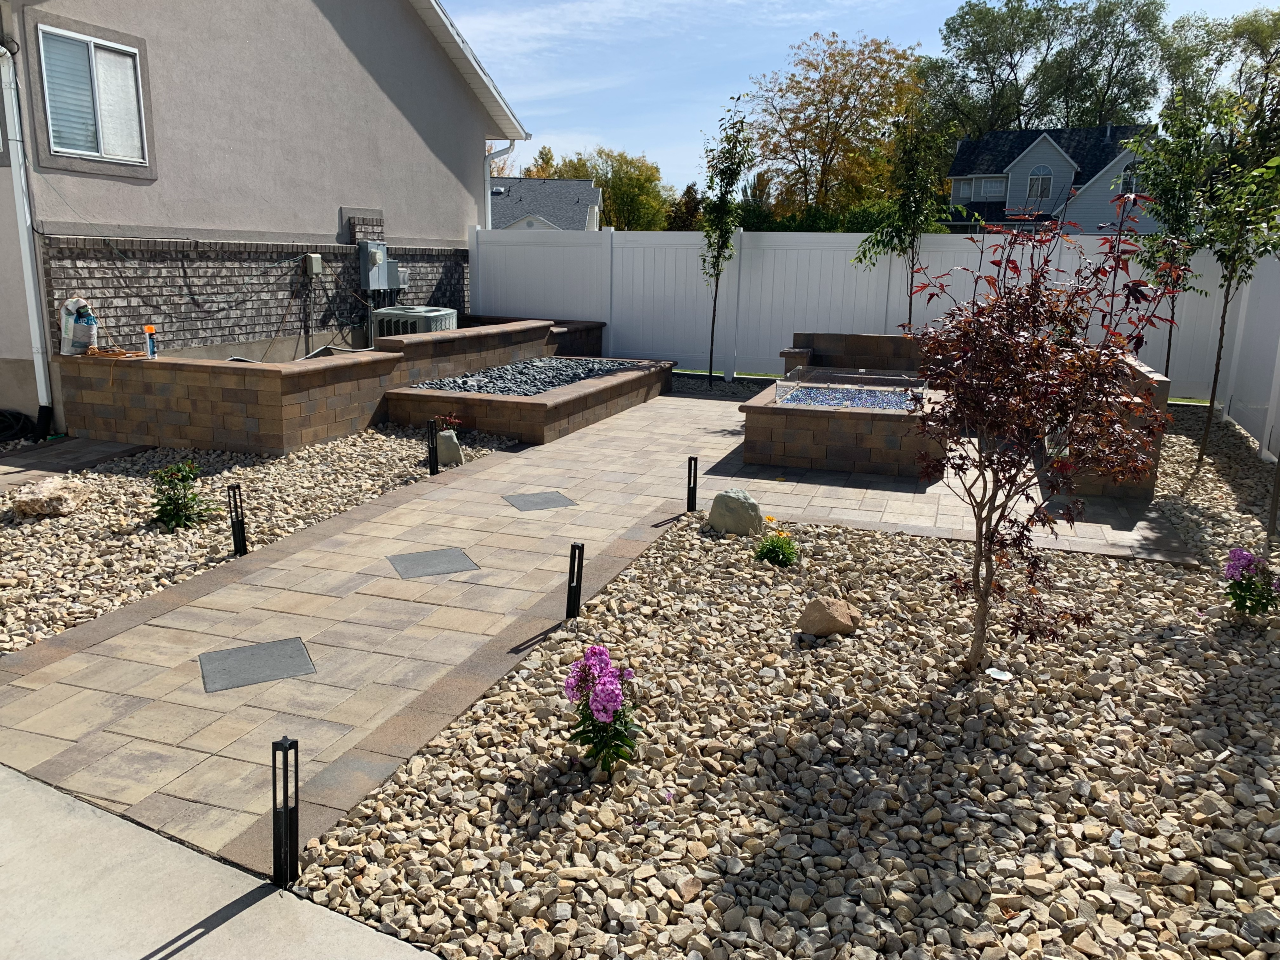 How to install a Paver Patio or Flagstone Patio